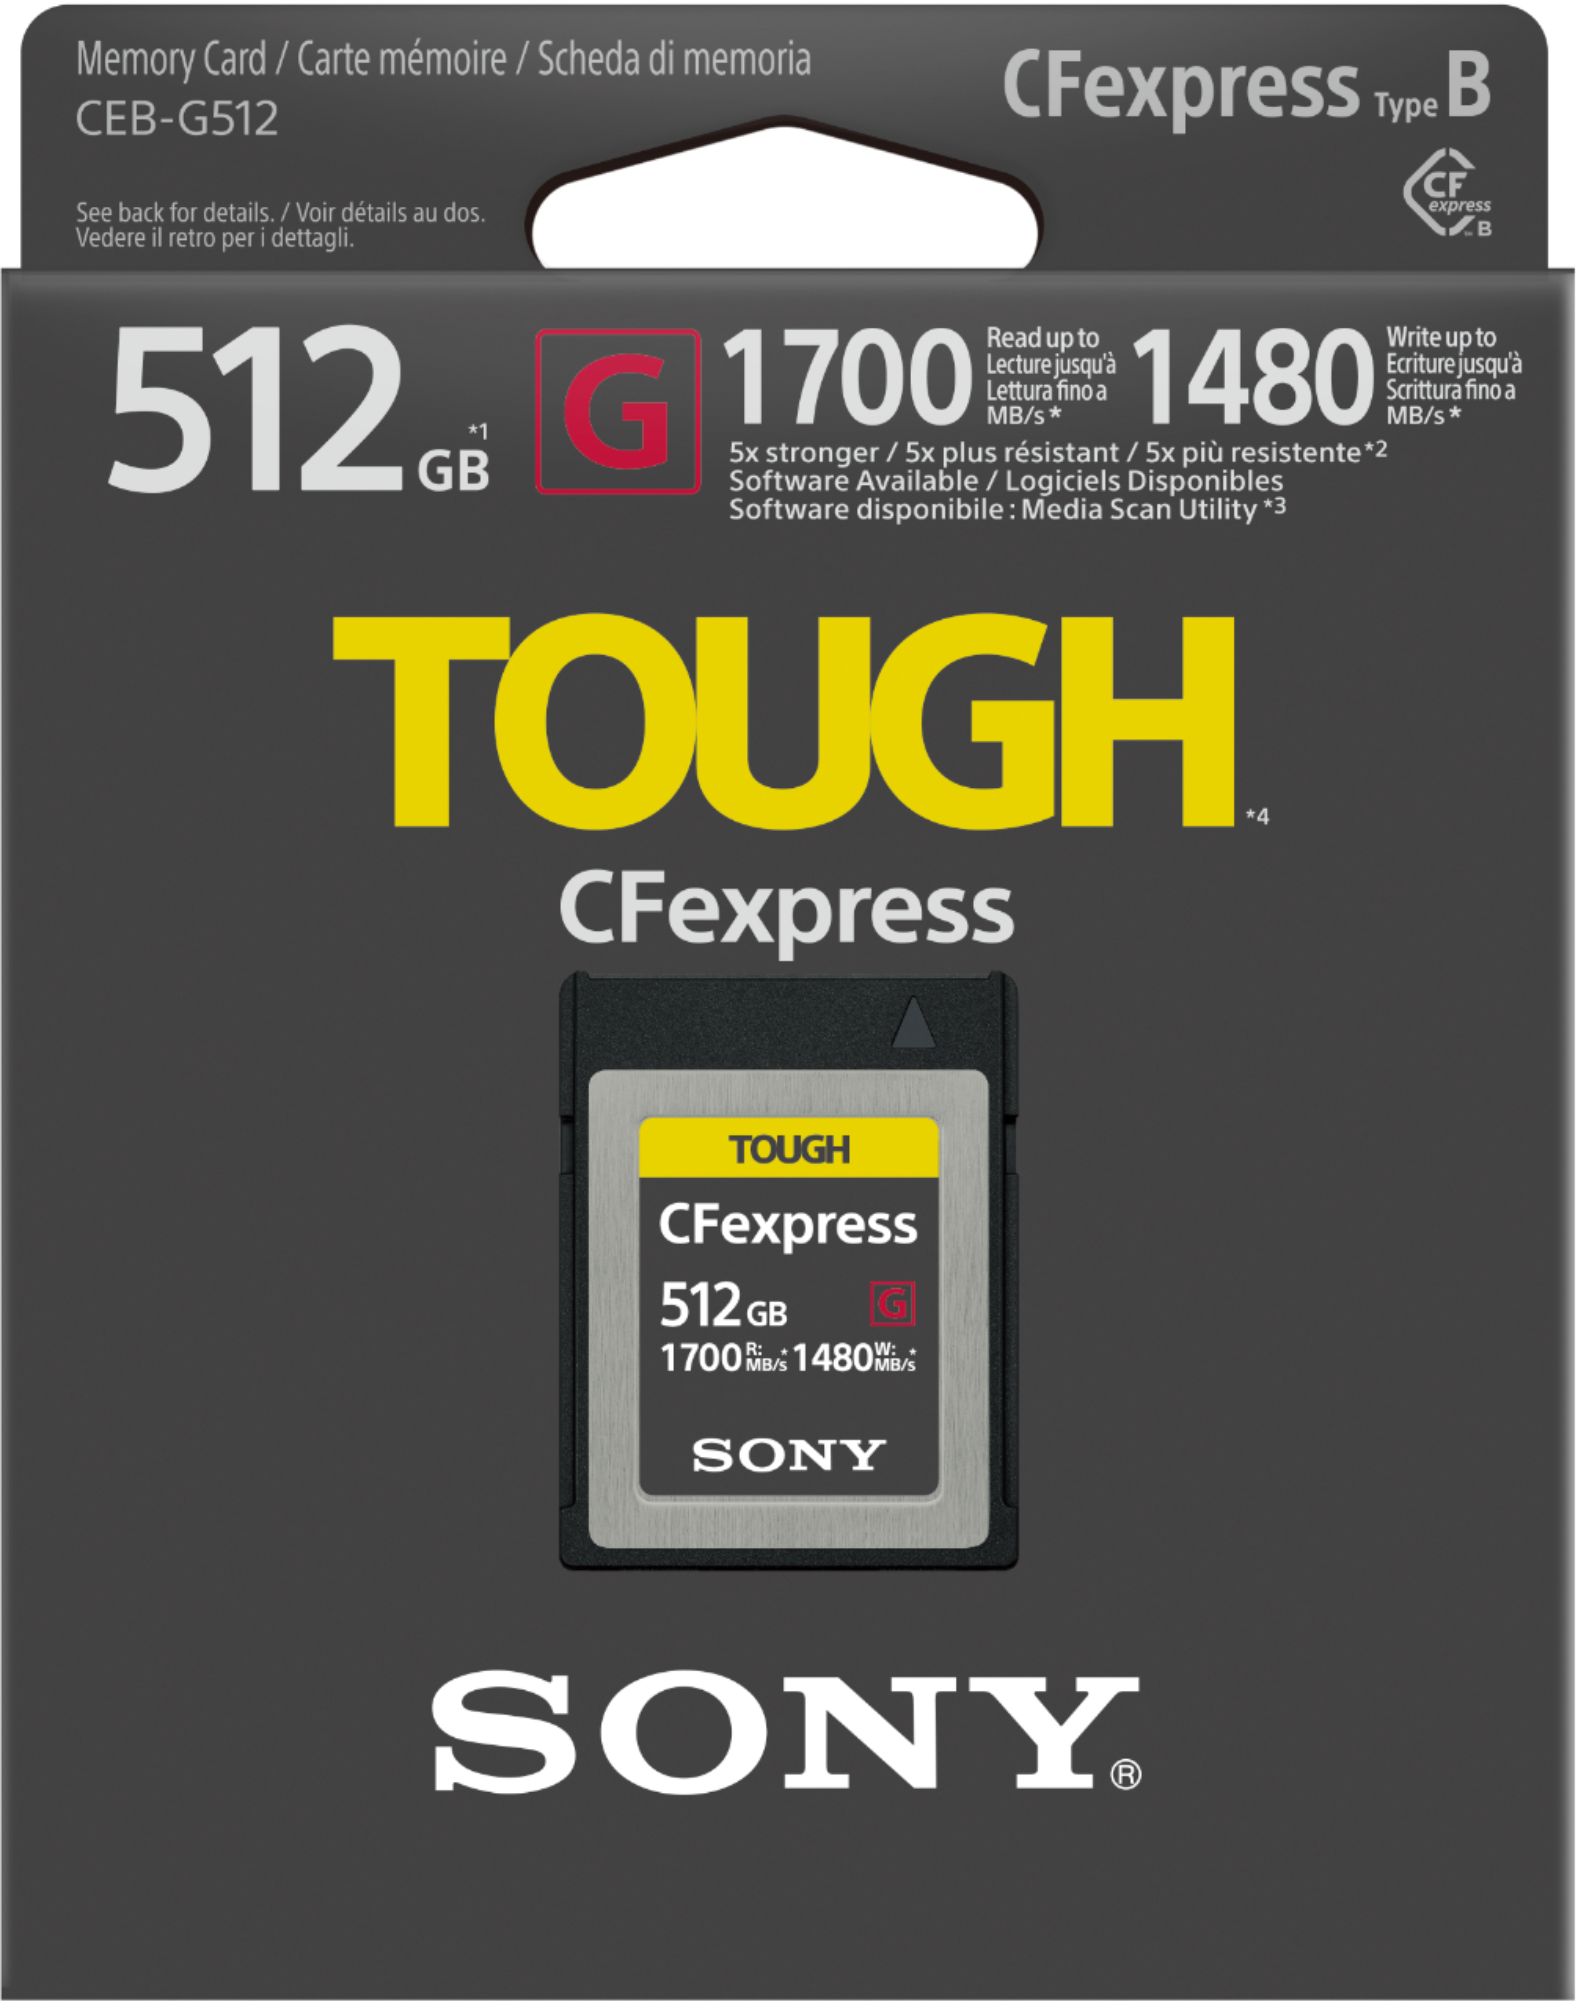 Sony TOUGH G Series 512GB CFexpress Memory Card - Best Buy